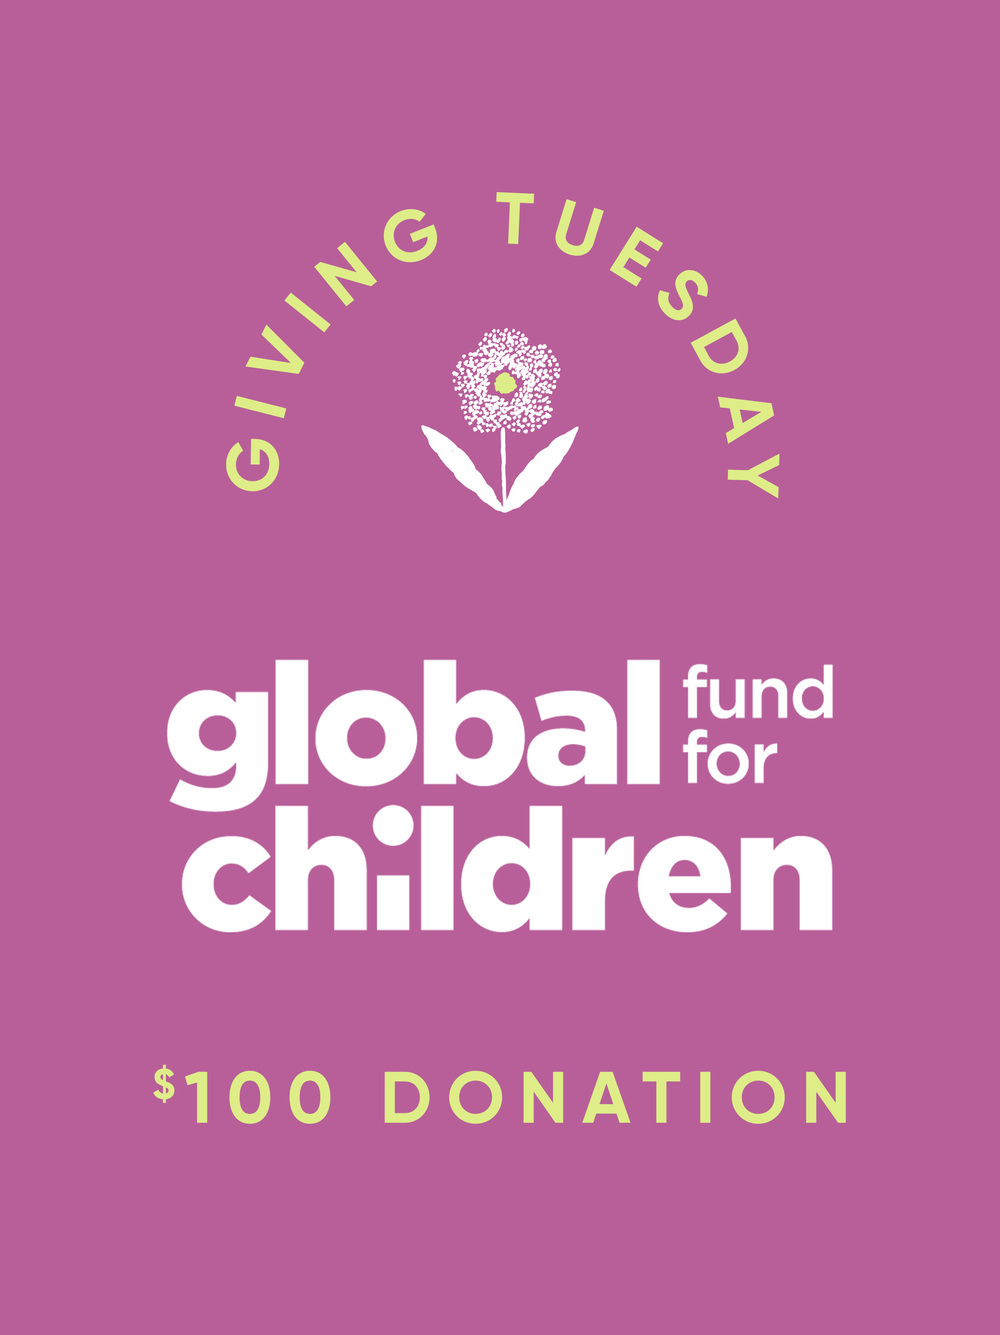 Donate $100 to Global Fund for Children